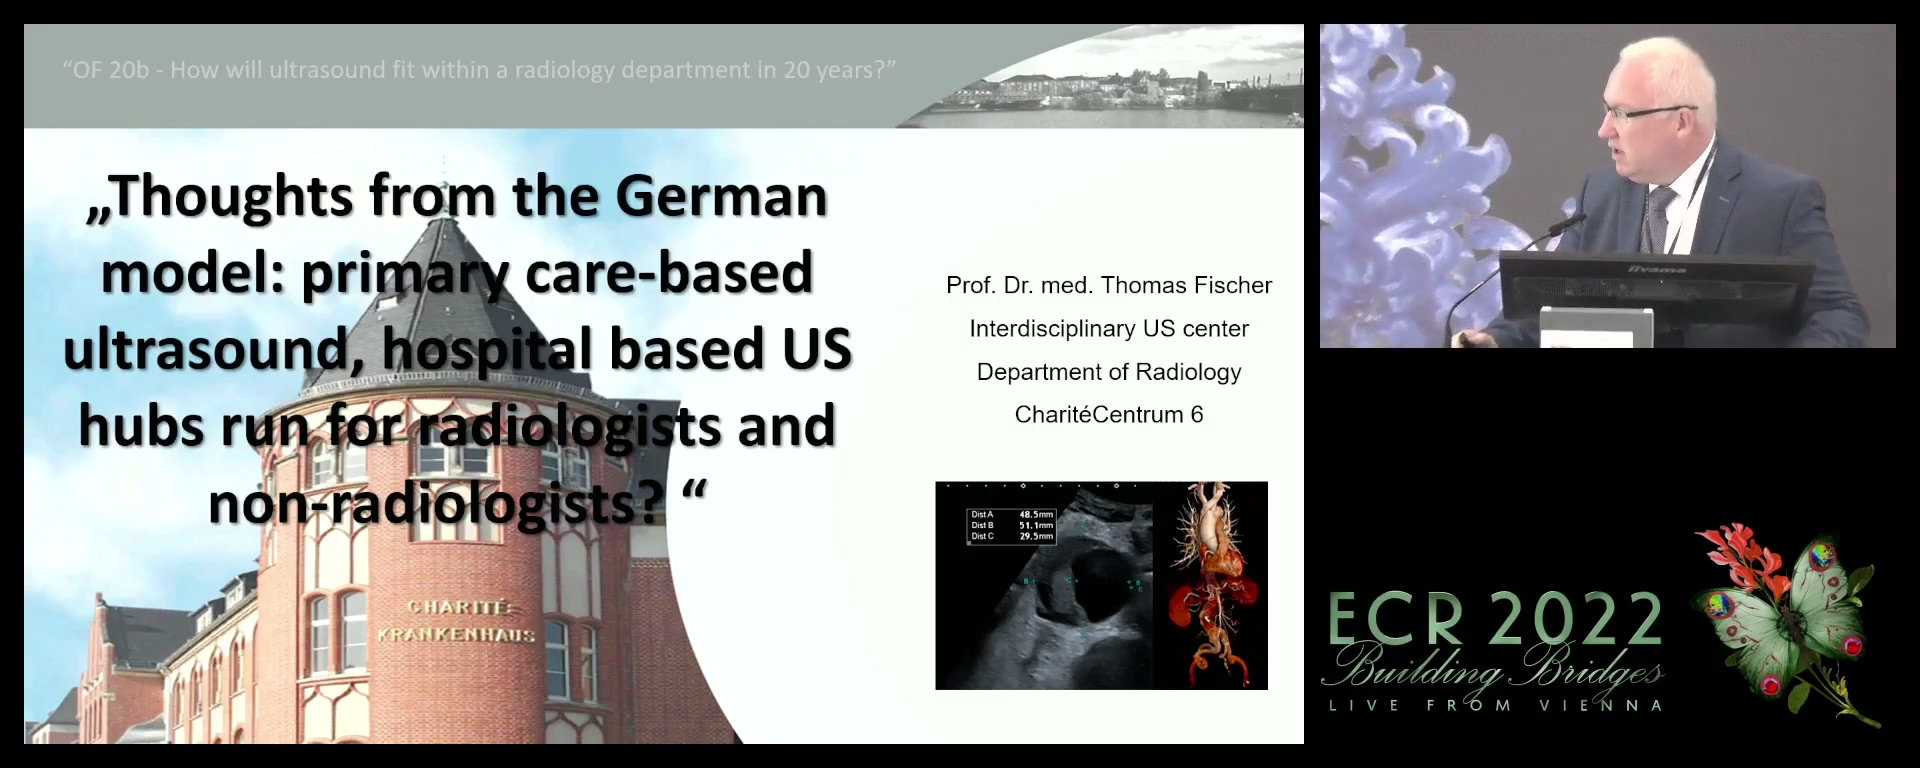 Thoughts from the German model: primary care-based ultrasound, hospital based US hubs run for radiologists and non-radiologists? - Thomas Fischer, Berlin / DE